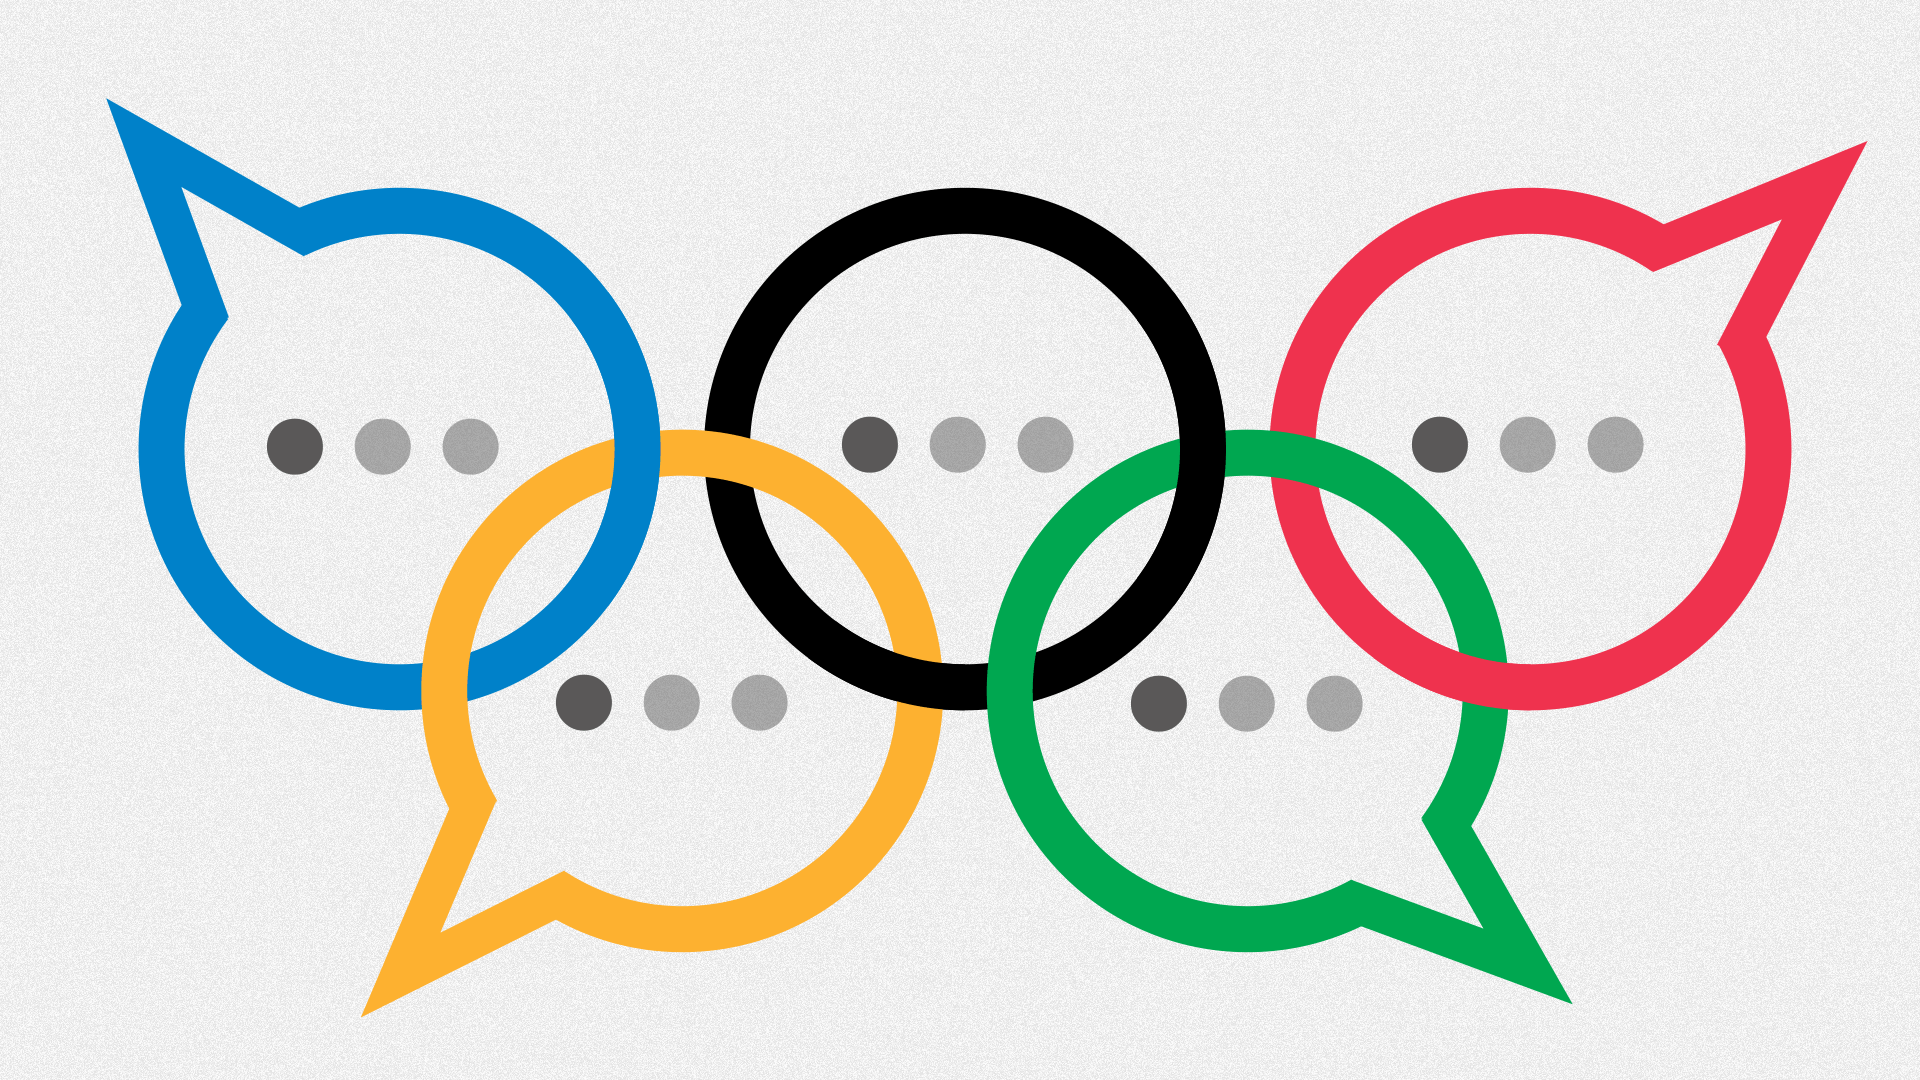 The 5 olympic rings as chat boxes